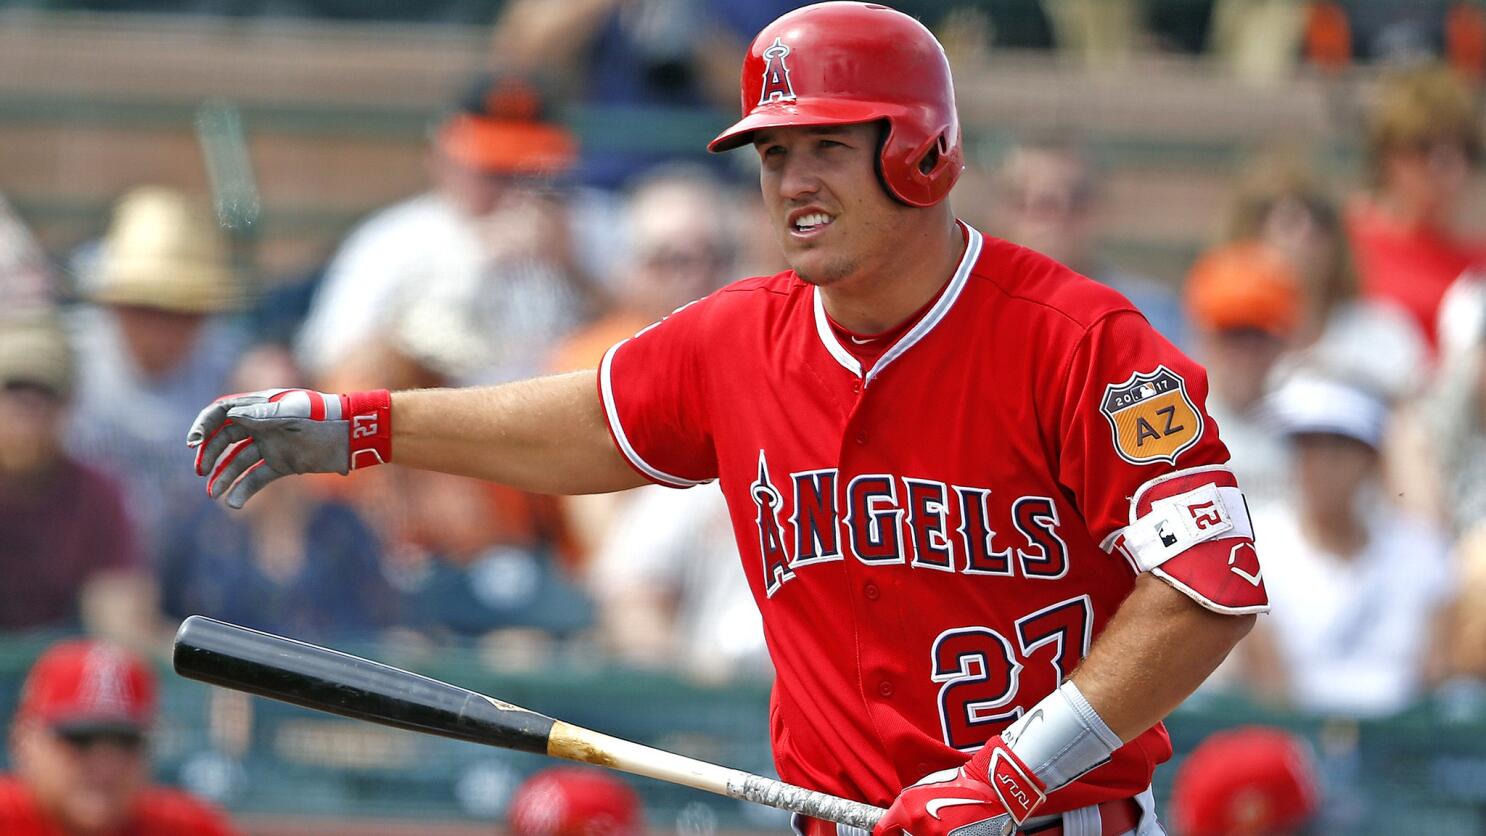 Ten years after Trout: Looking back at the 2009 MLB Draft